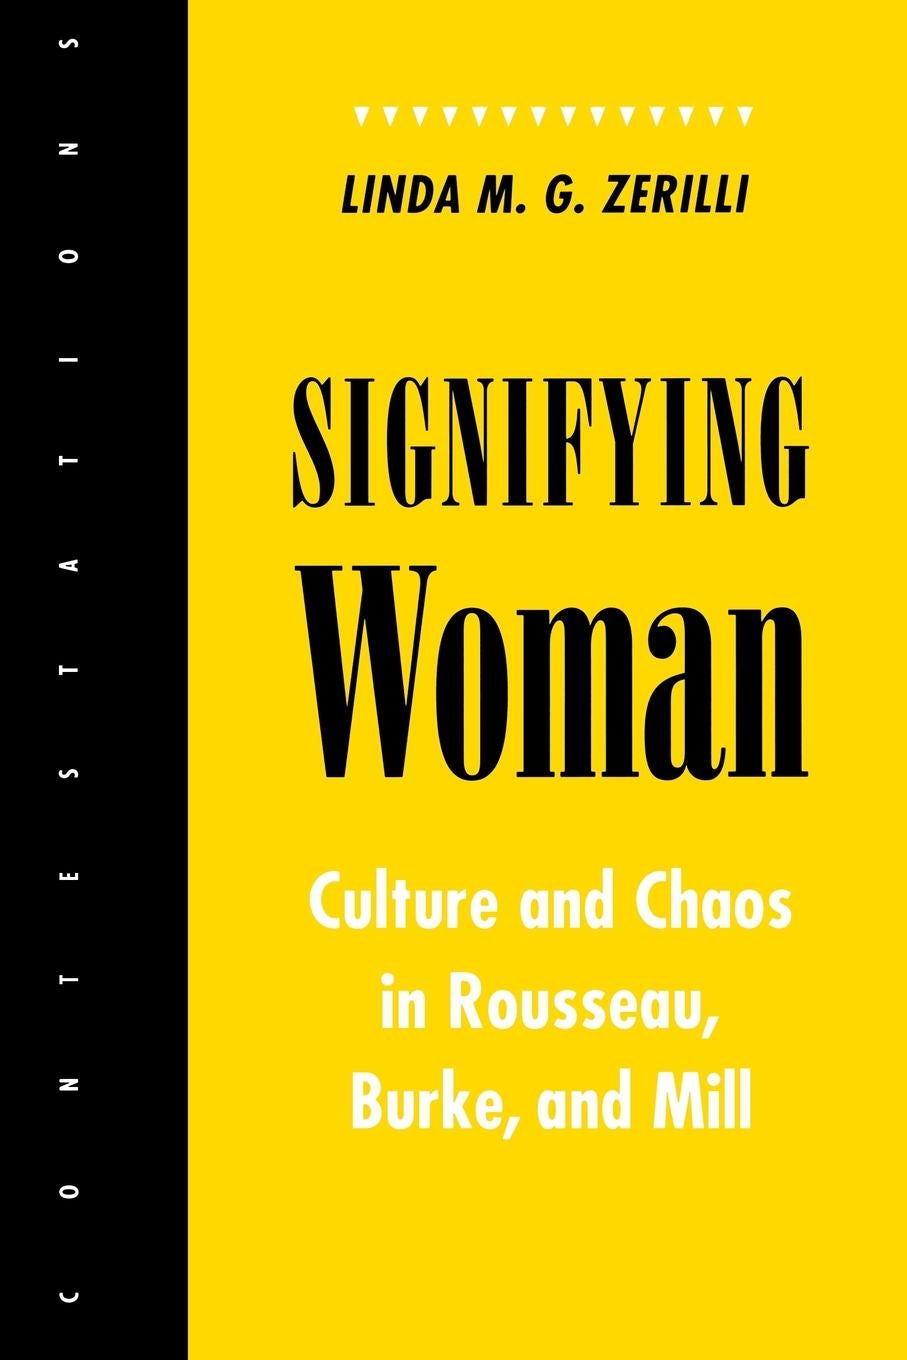 Signifying Woman by Linda M. G. Zerilli | Paperback | Cornell 